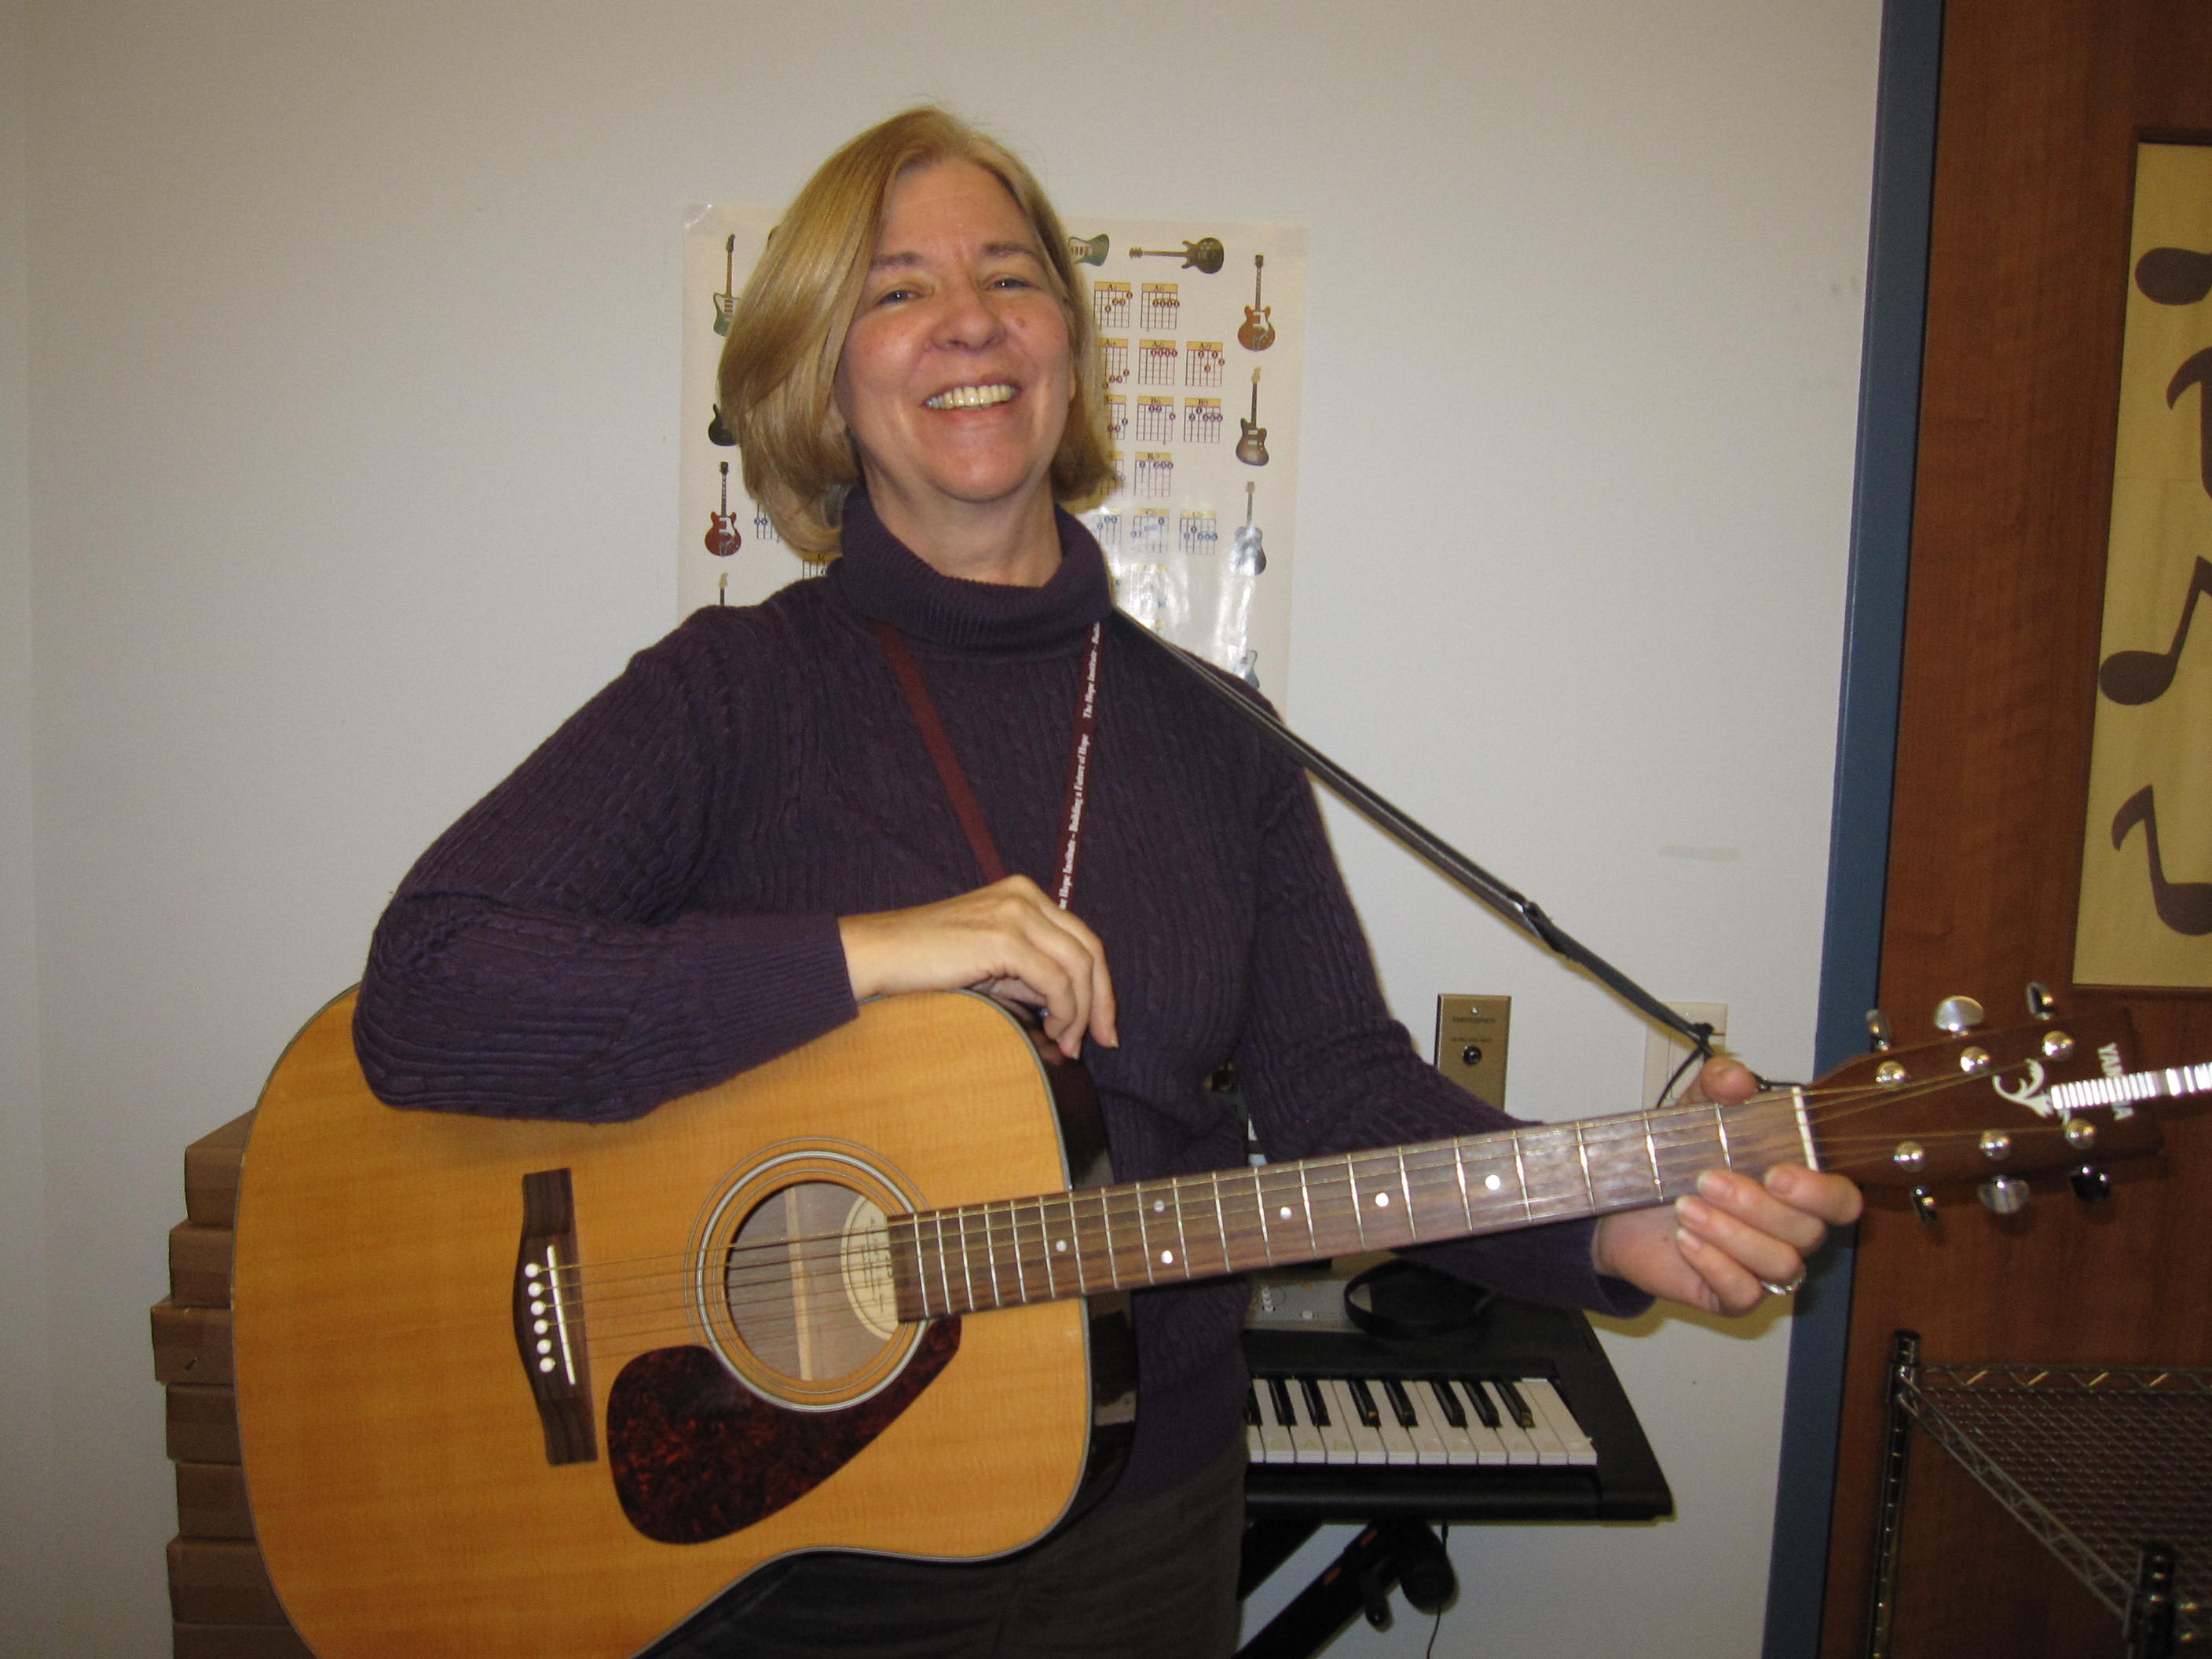 Reflections from a Music Therapy Intern